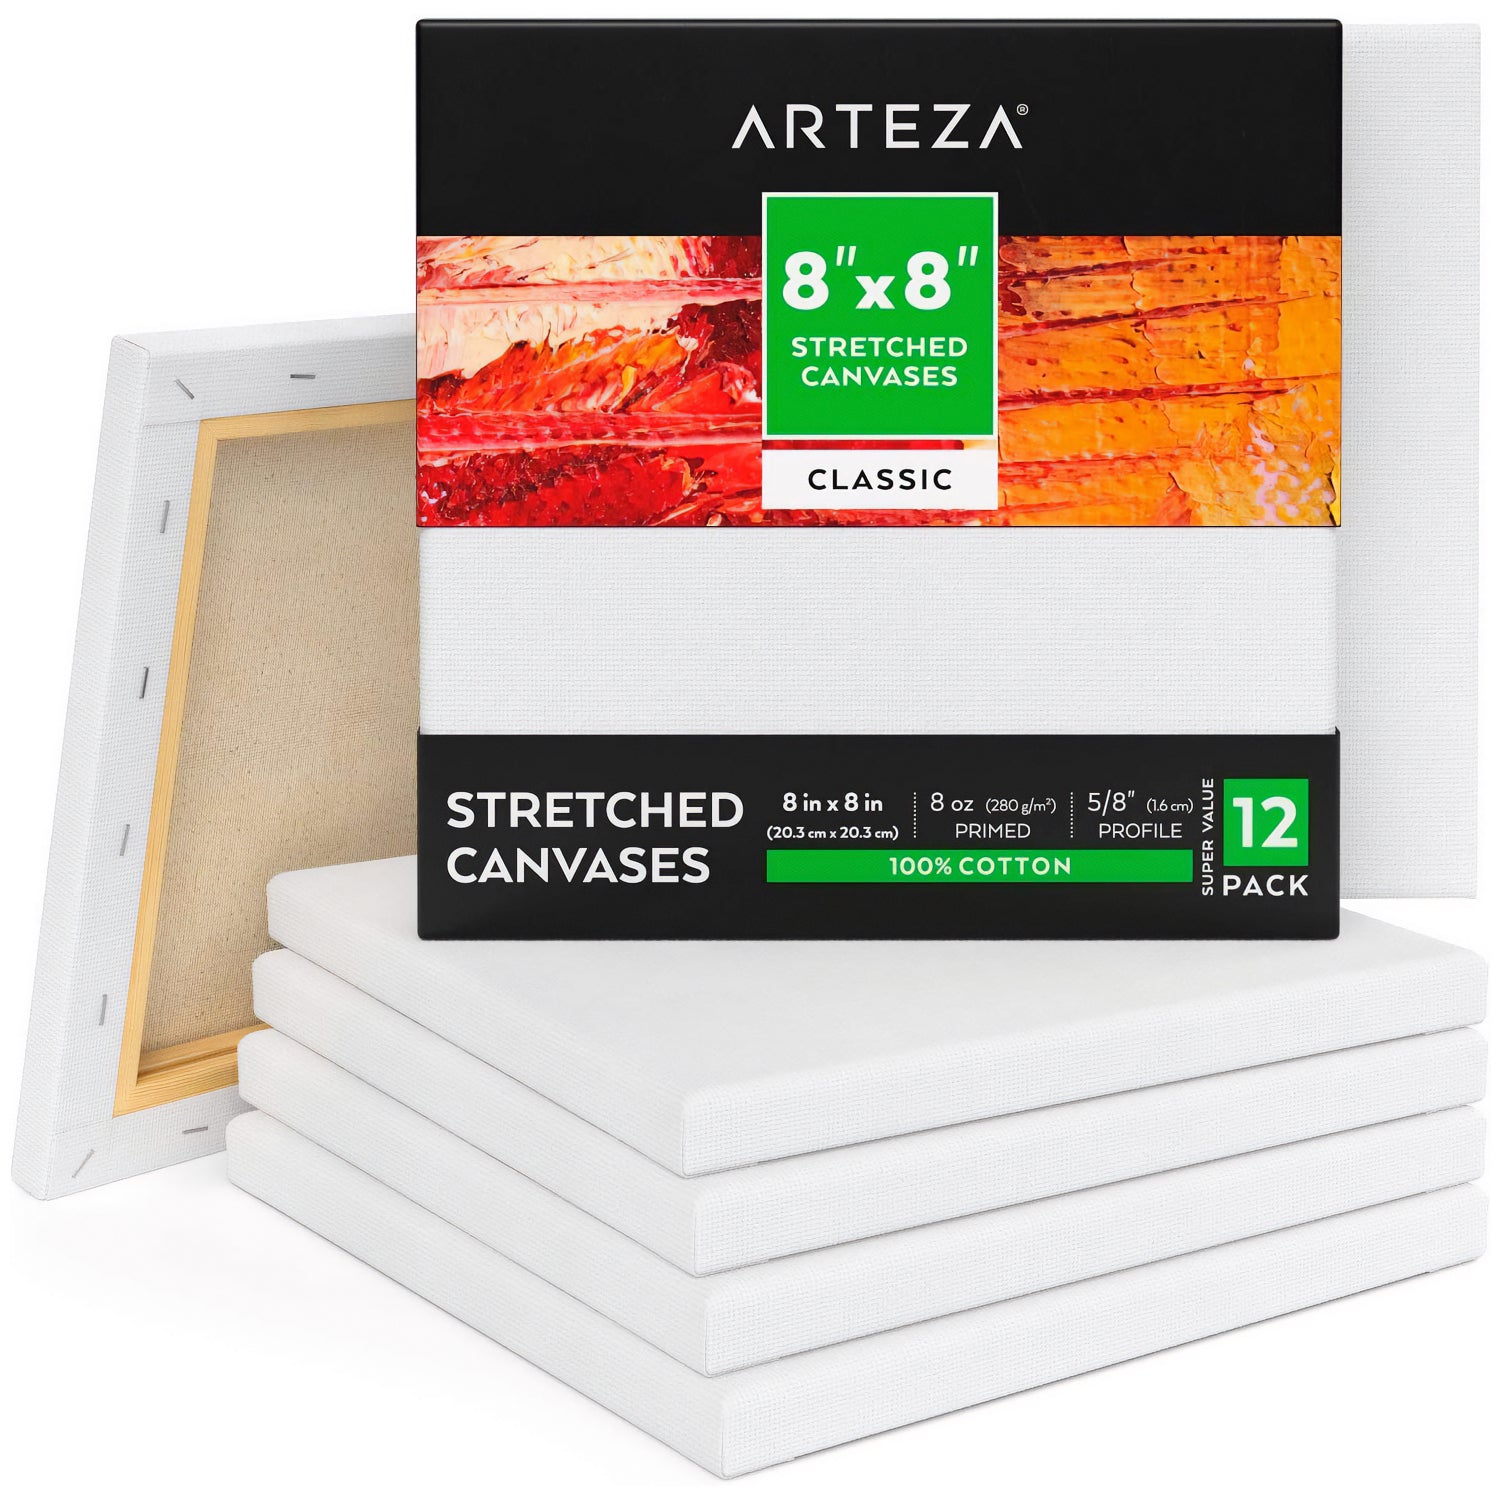 Creative Inspirations 8x8 Value Stretched Canvas, Box of 50